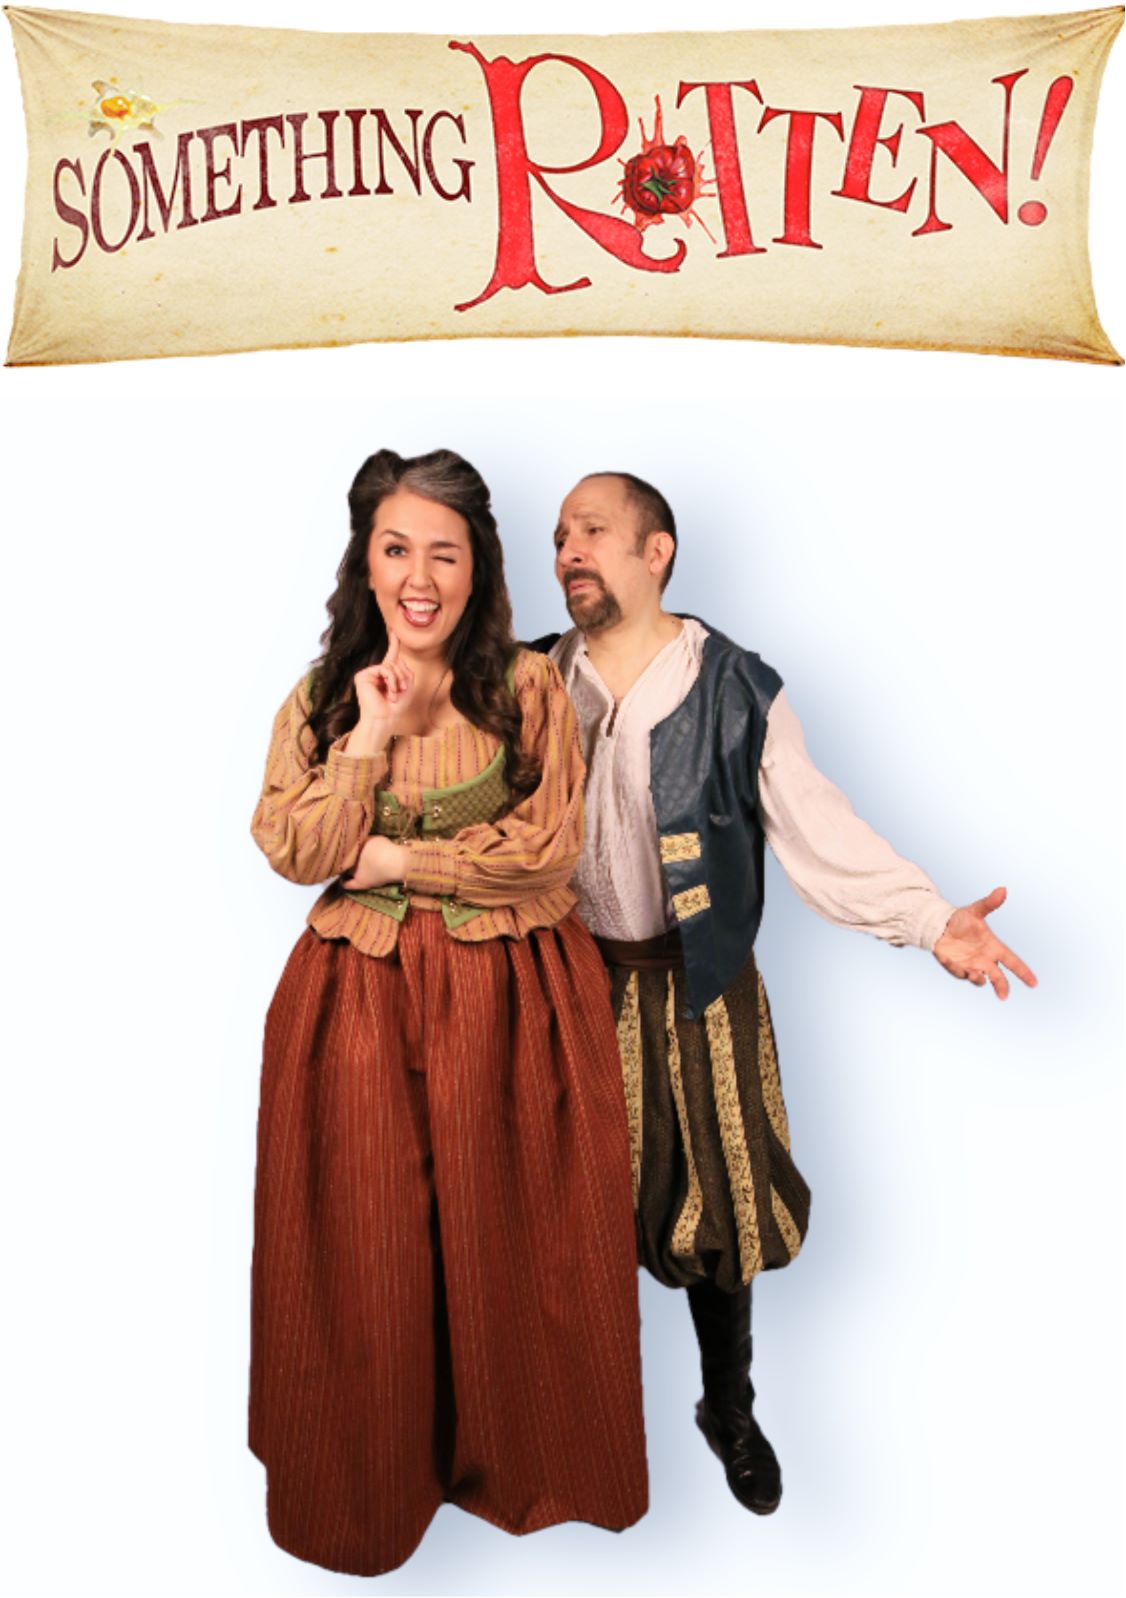 “Something Rotten!” presented by Theatre Nebula featuring (left to right) Rachel Carreras (Bea Bottom) and David Pfenninger (Nick Bottom).